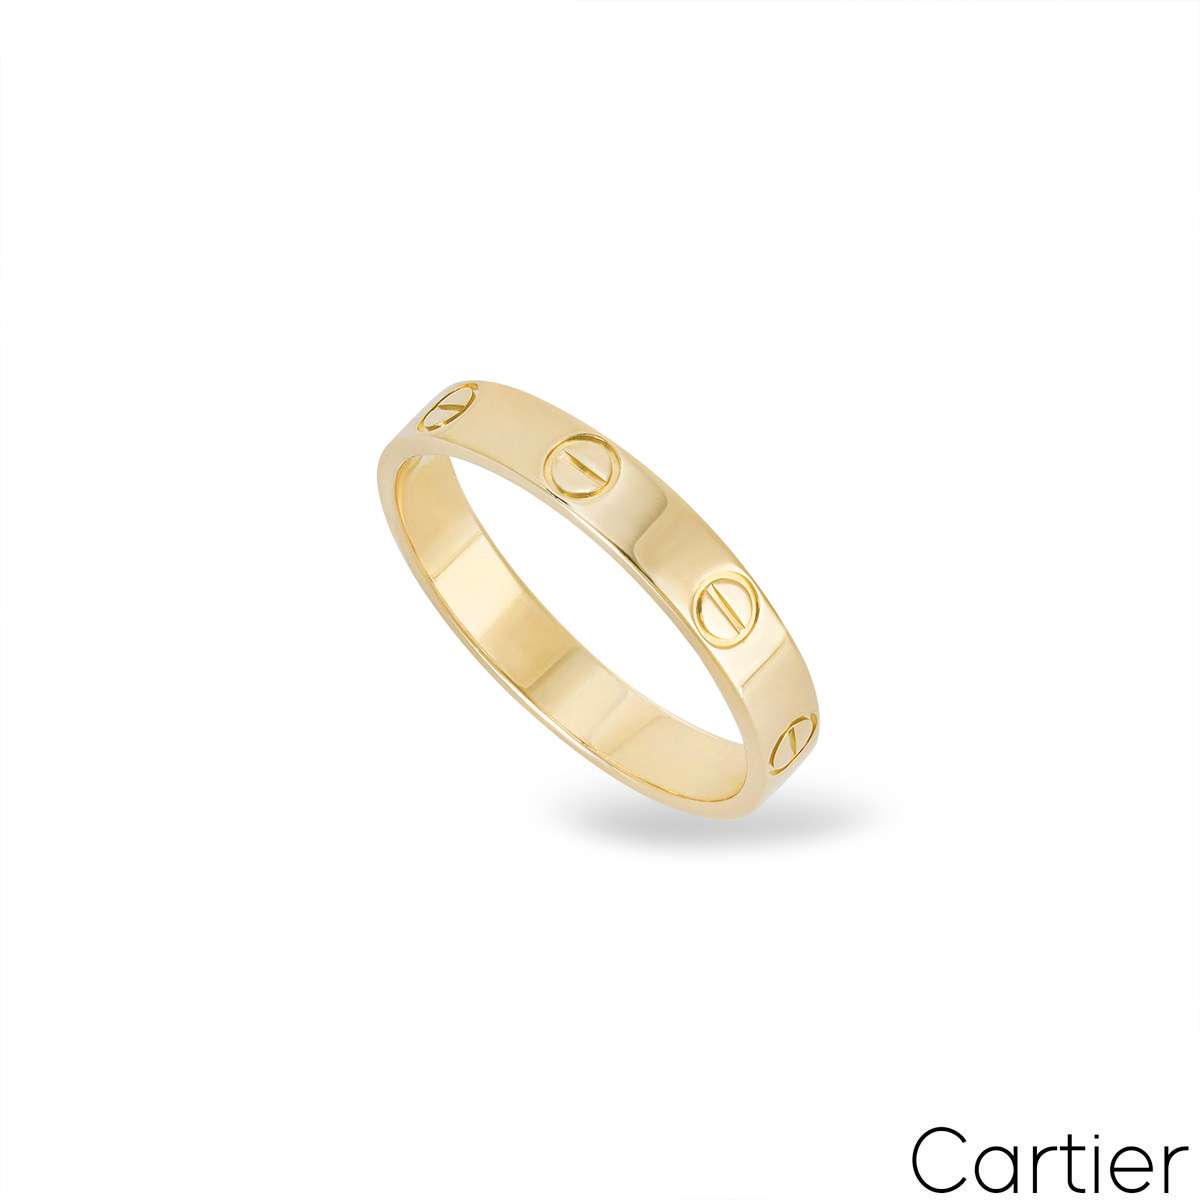 Cartier love ring review | Pros, cons, price, do I still like it? - YouTube